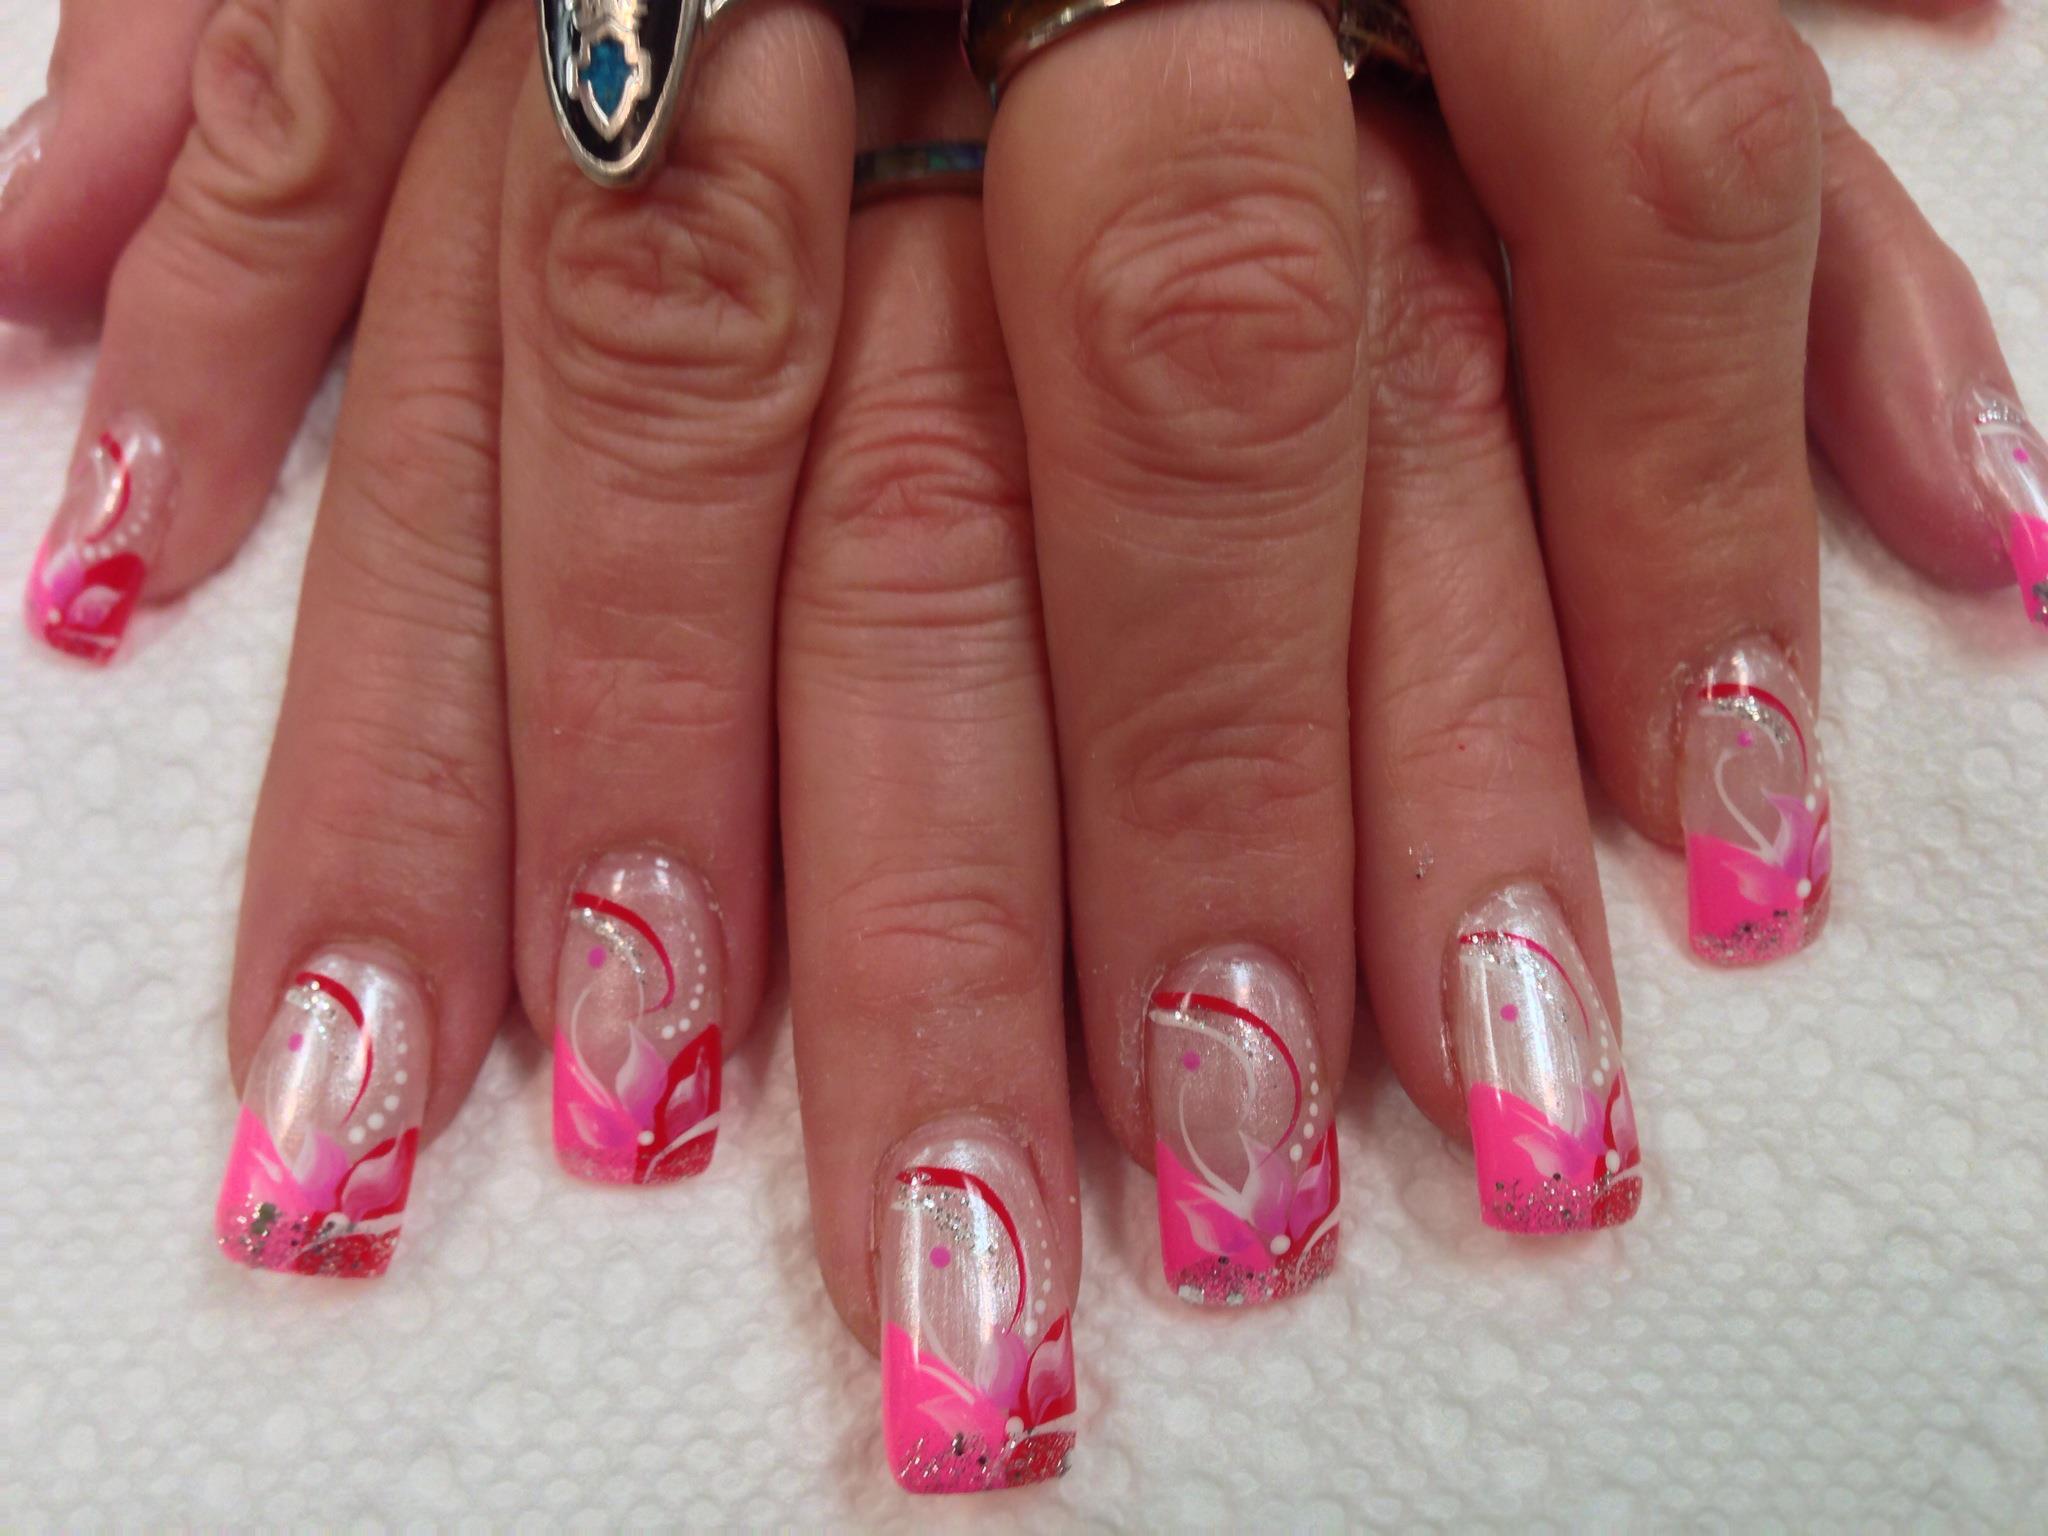 2. "Gel Nail Designs for Valentine's Day and Birthdays" - wide 6